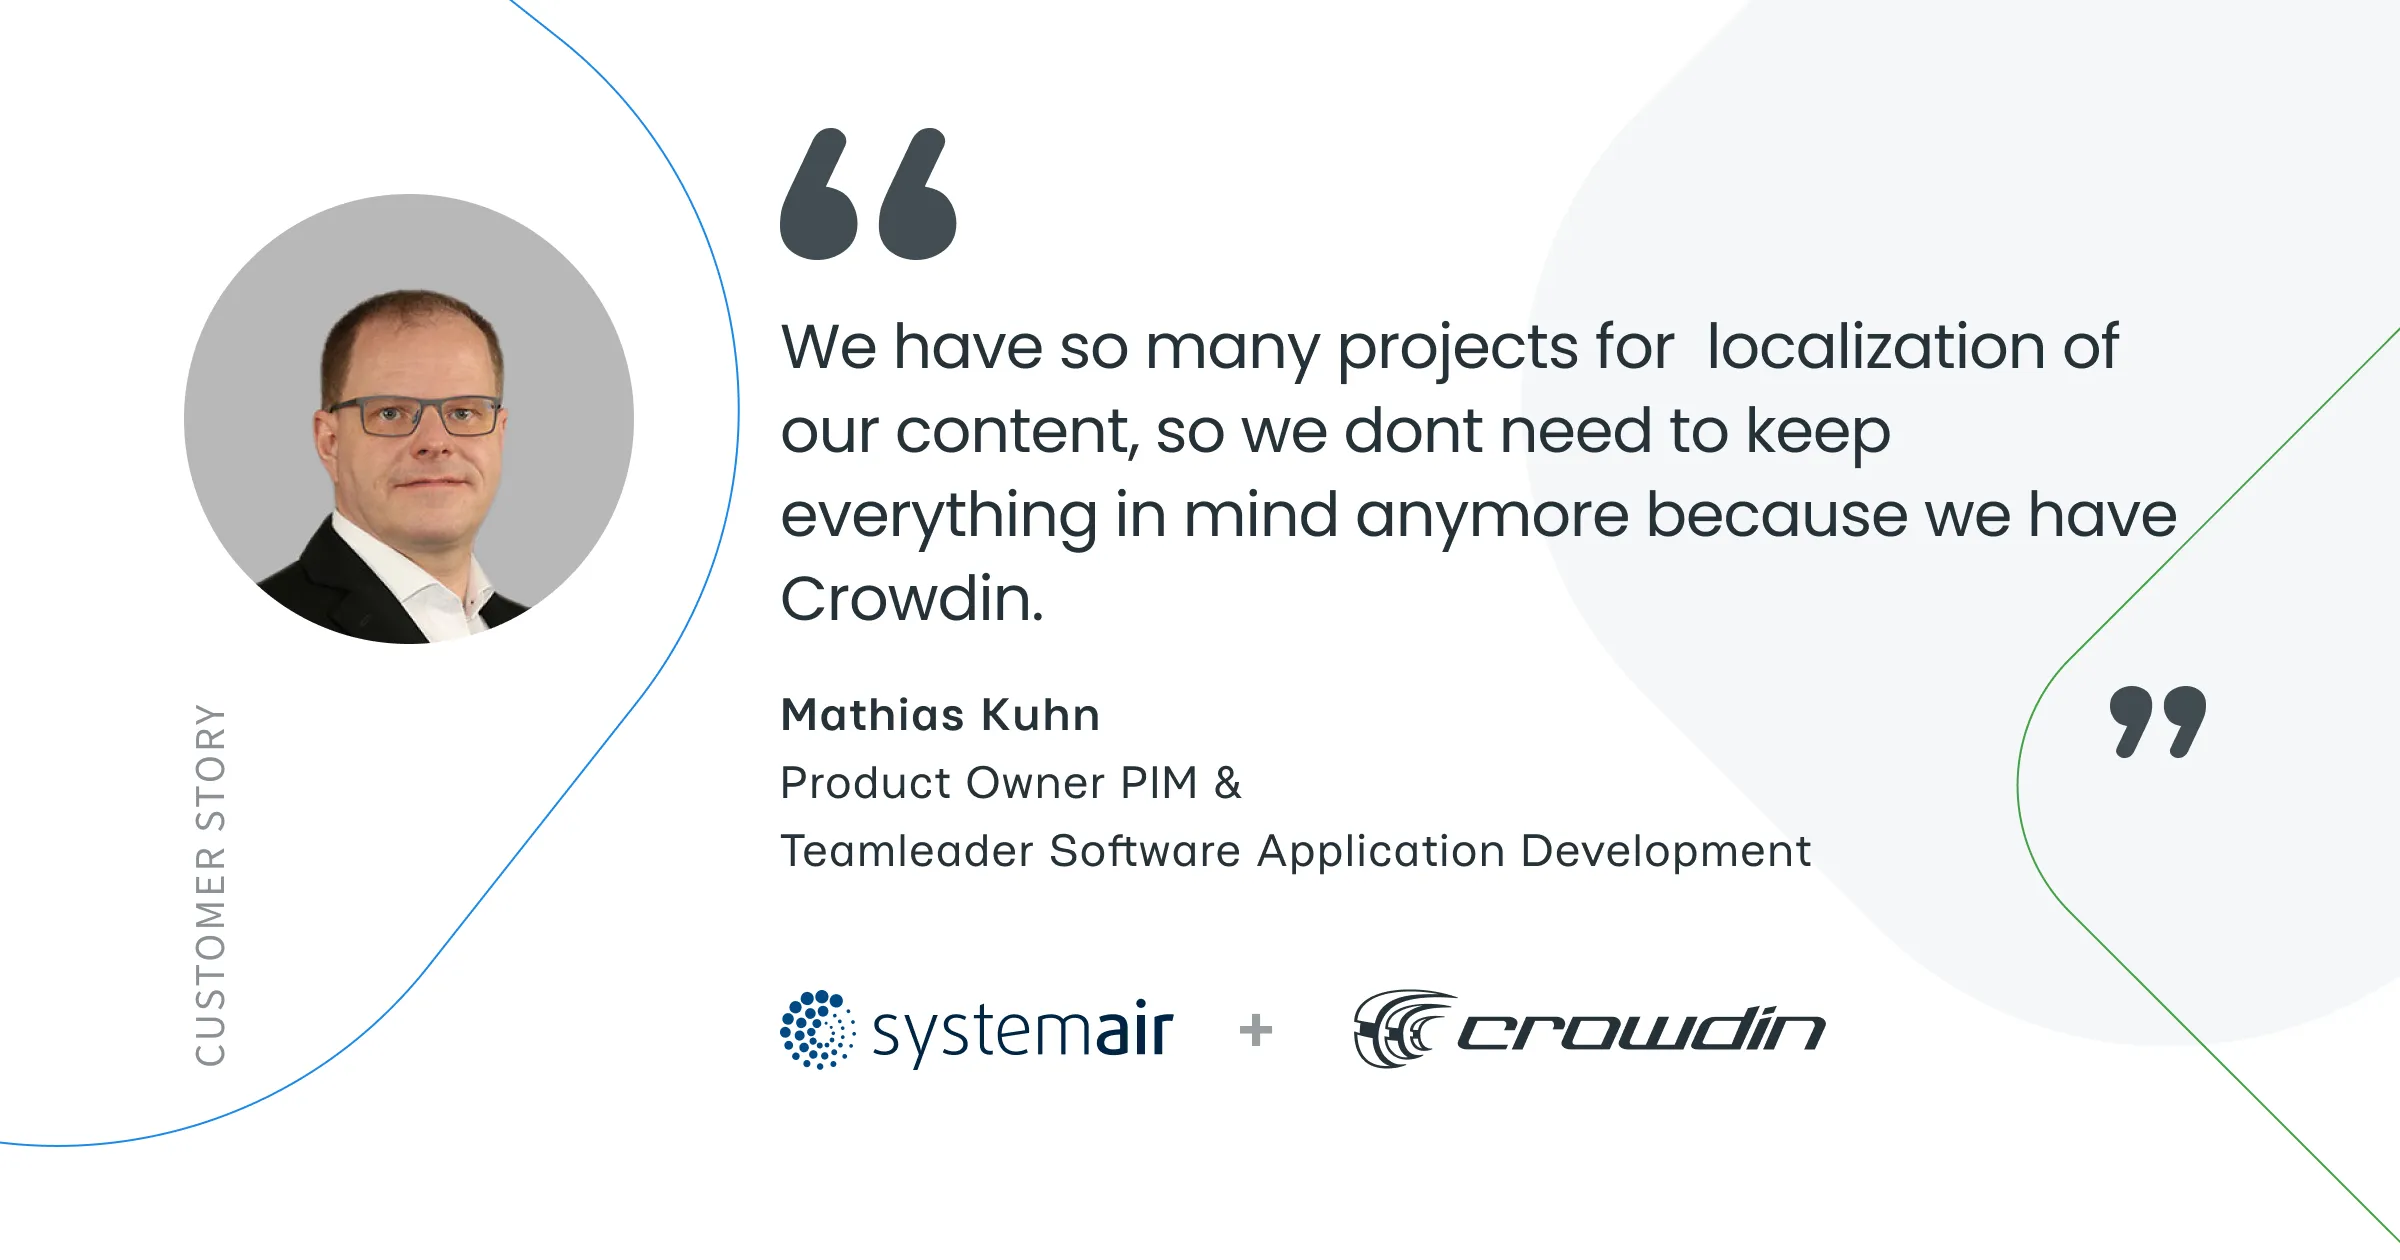 Why Systemair chooses Crowdin for localziation